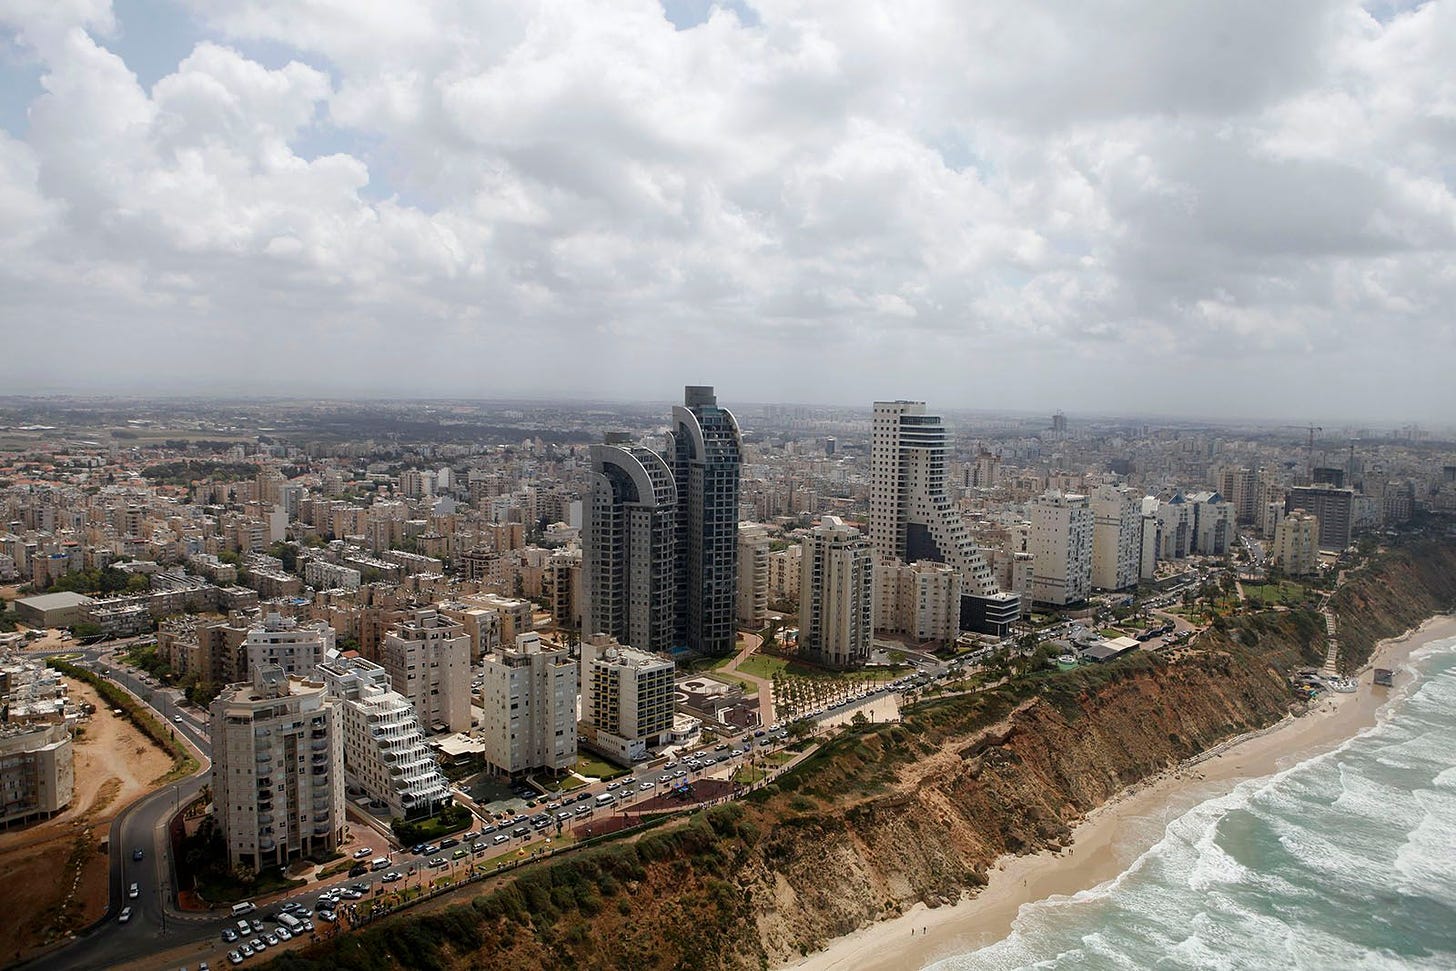 The Netanya coast line is seen from the sky during the annual celebrations of Israel's 65th Independence Day. April 16, 2013. (Photo by Flash90)